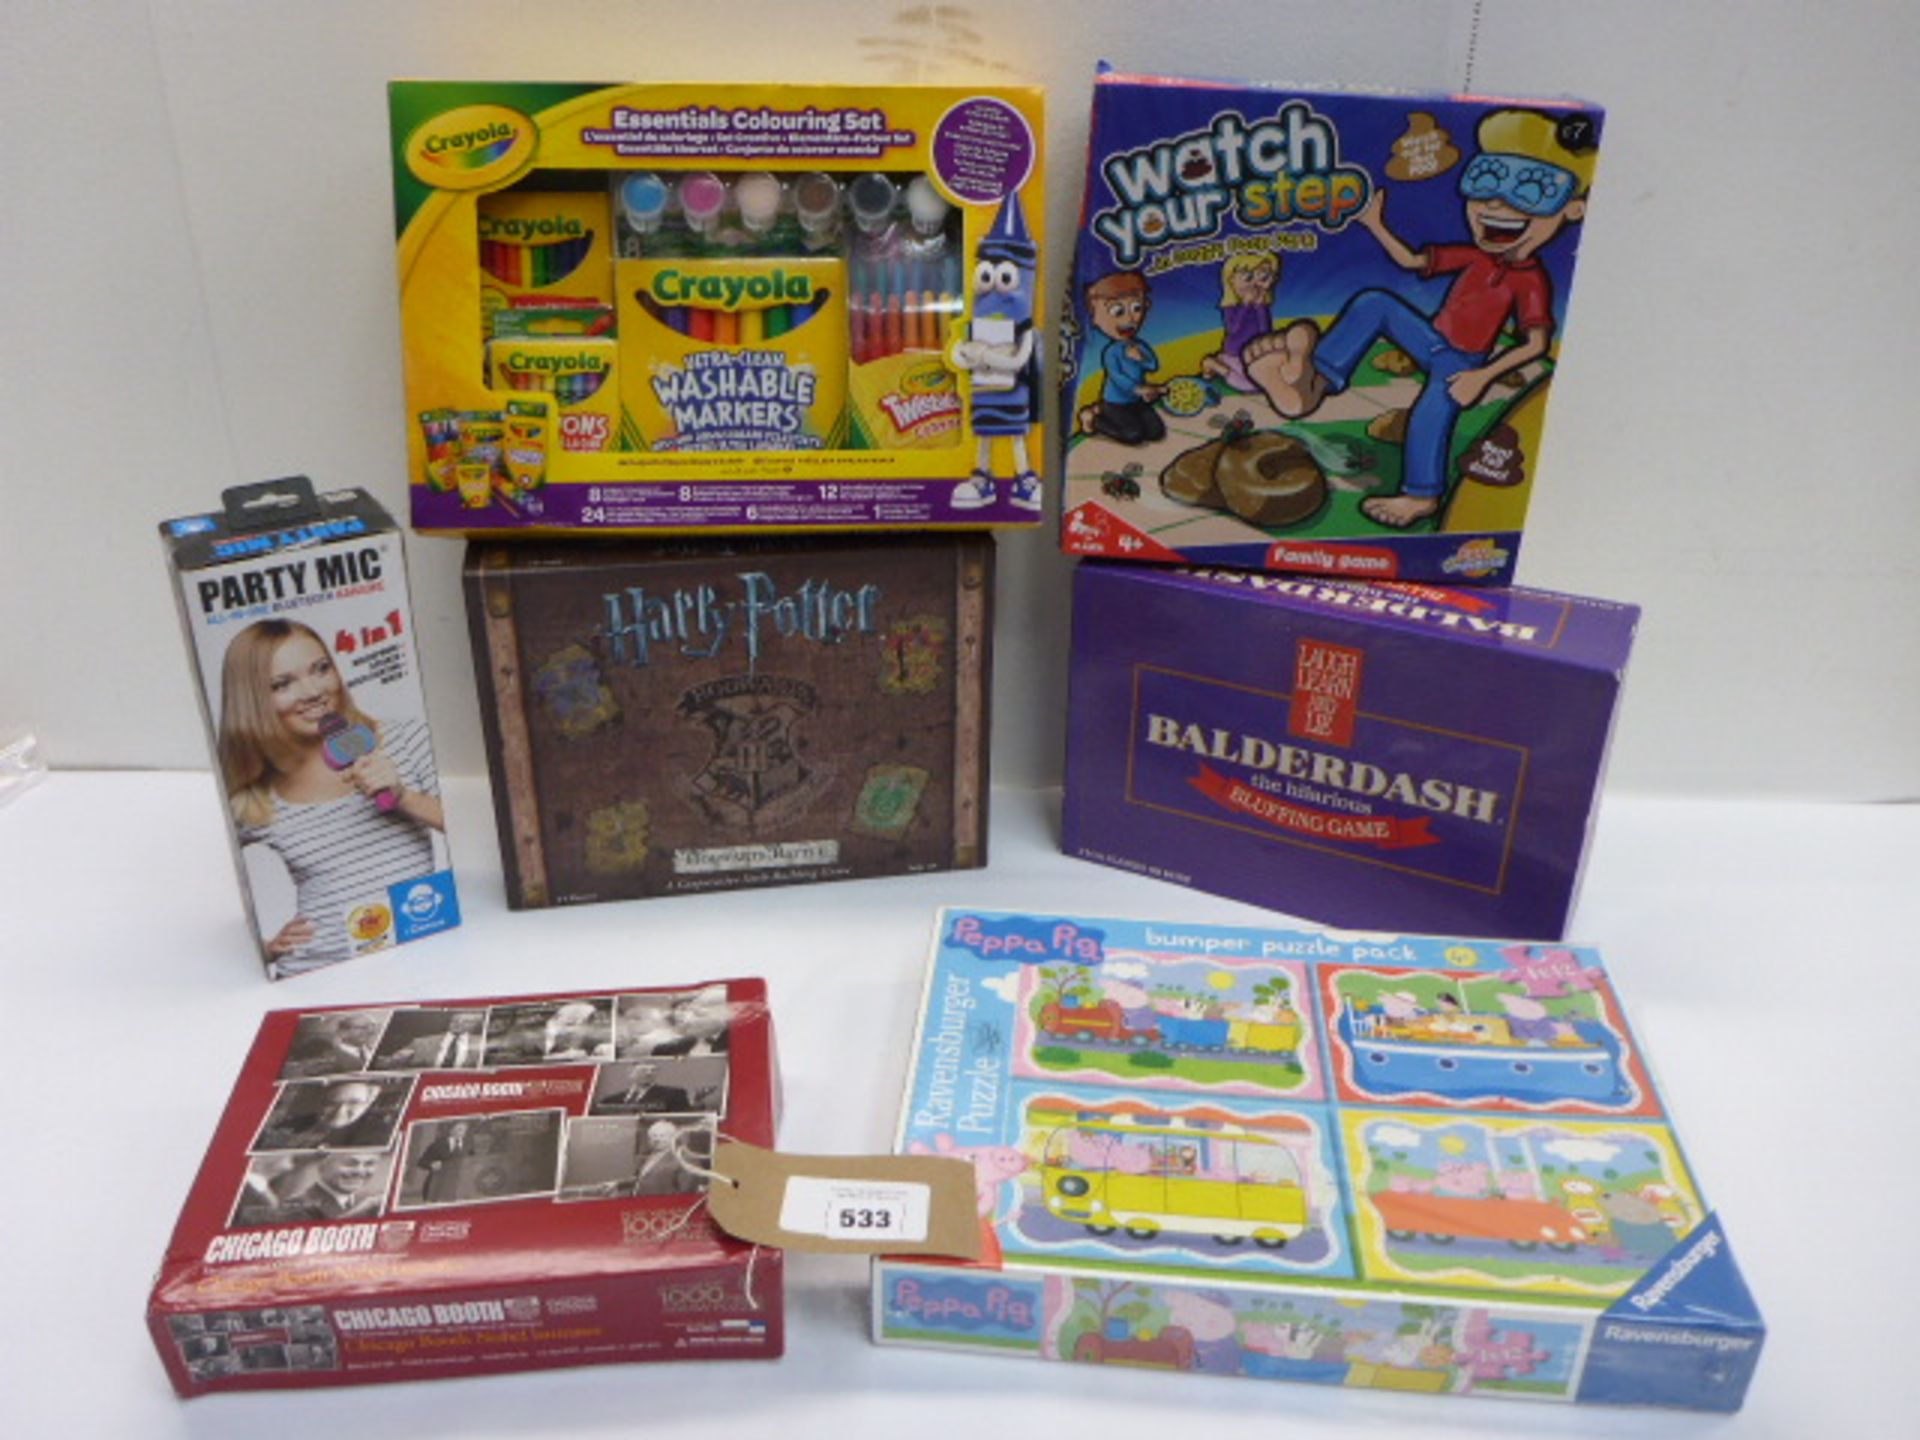 Harry Potter building game, Party Mic, Crayola colouring set, Watch Your Step, Balderdash and